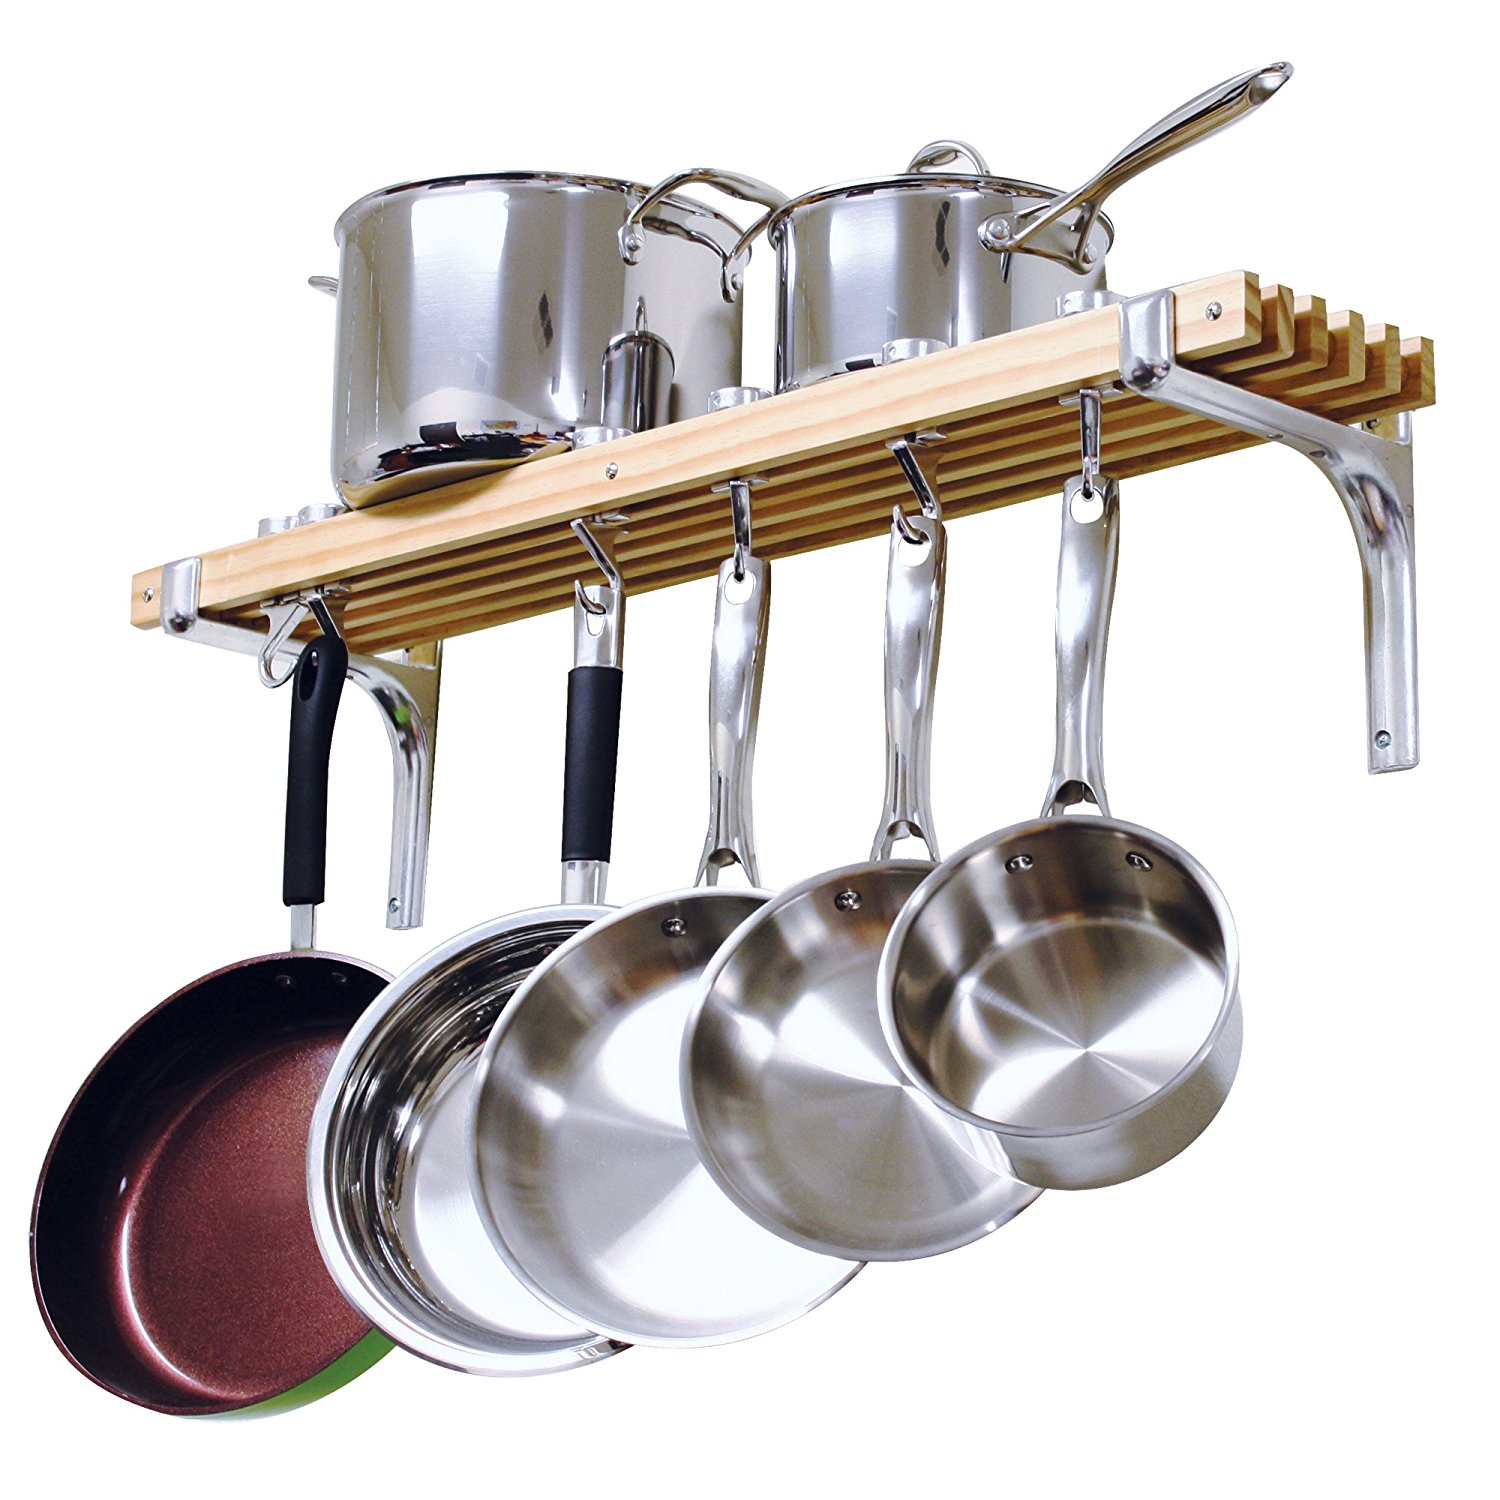 Cooks Standard Wall Mount Pot Rack, 36 by 8-Inch